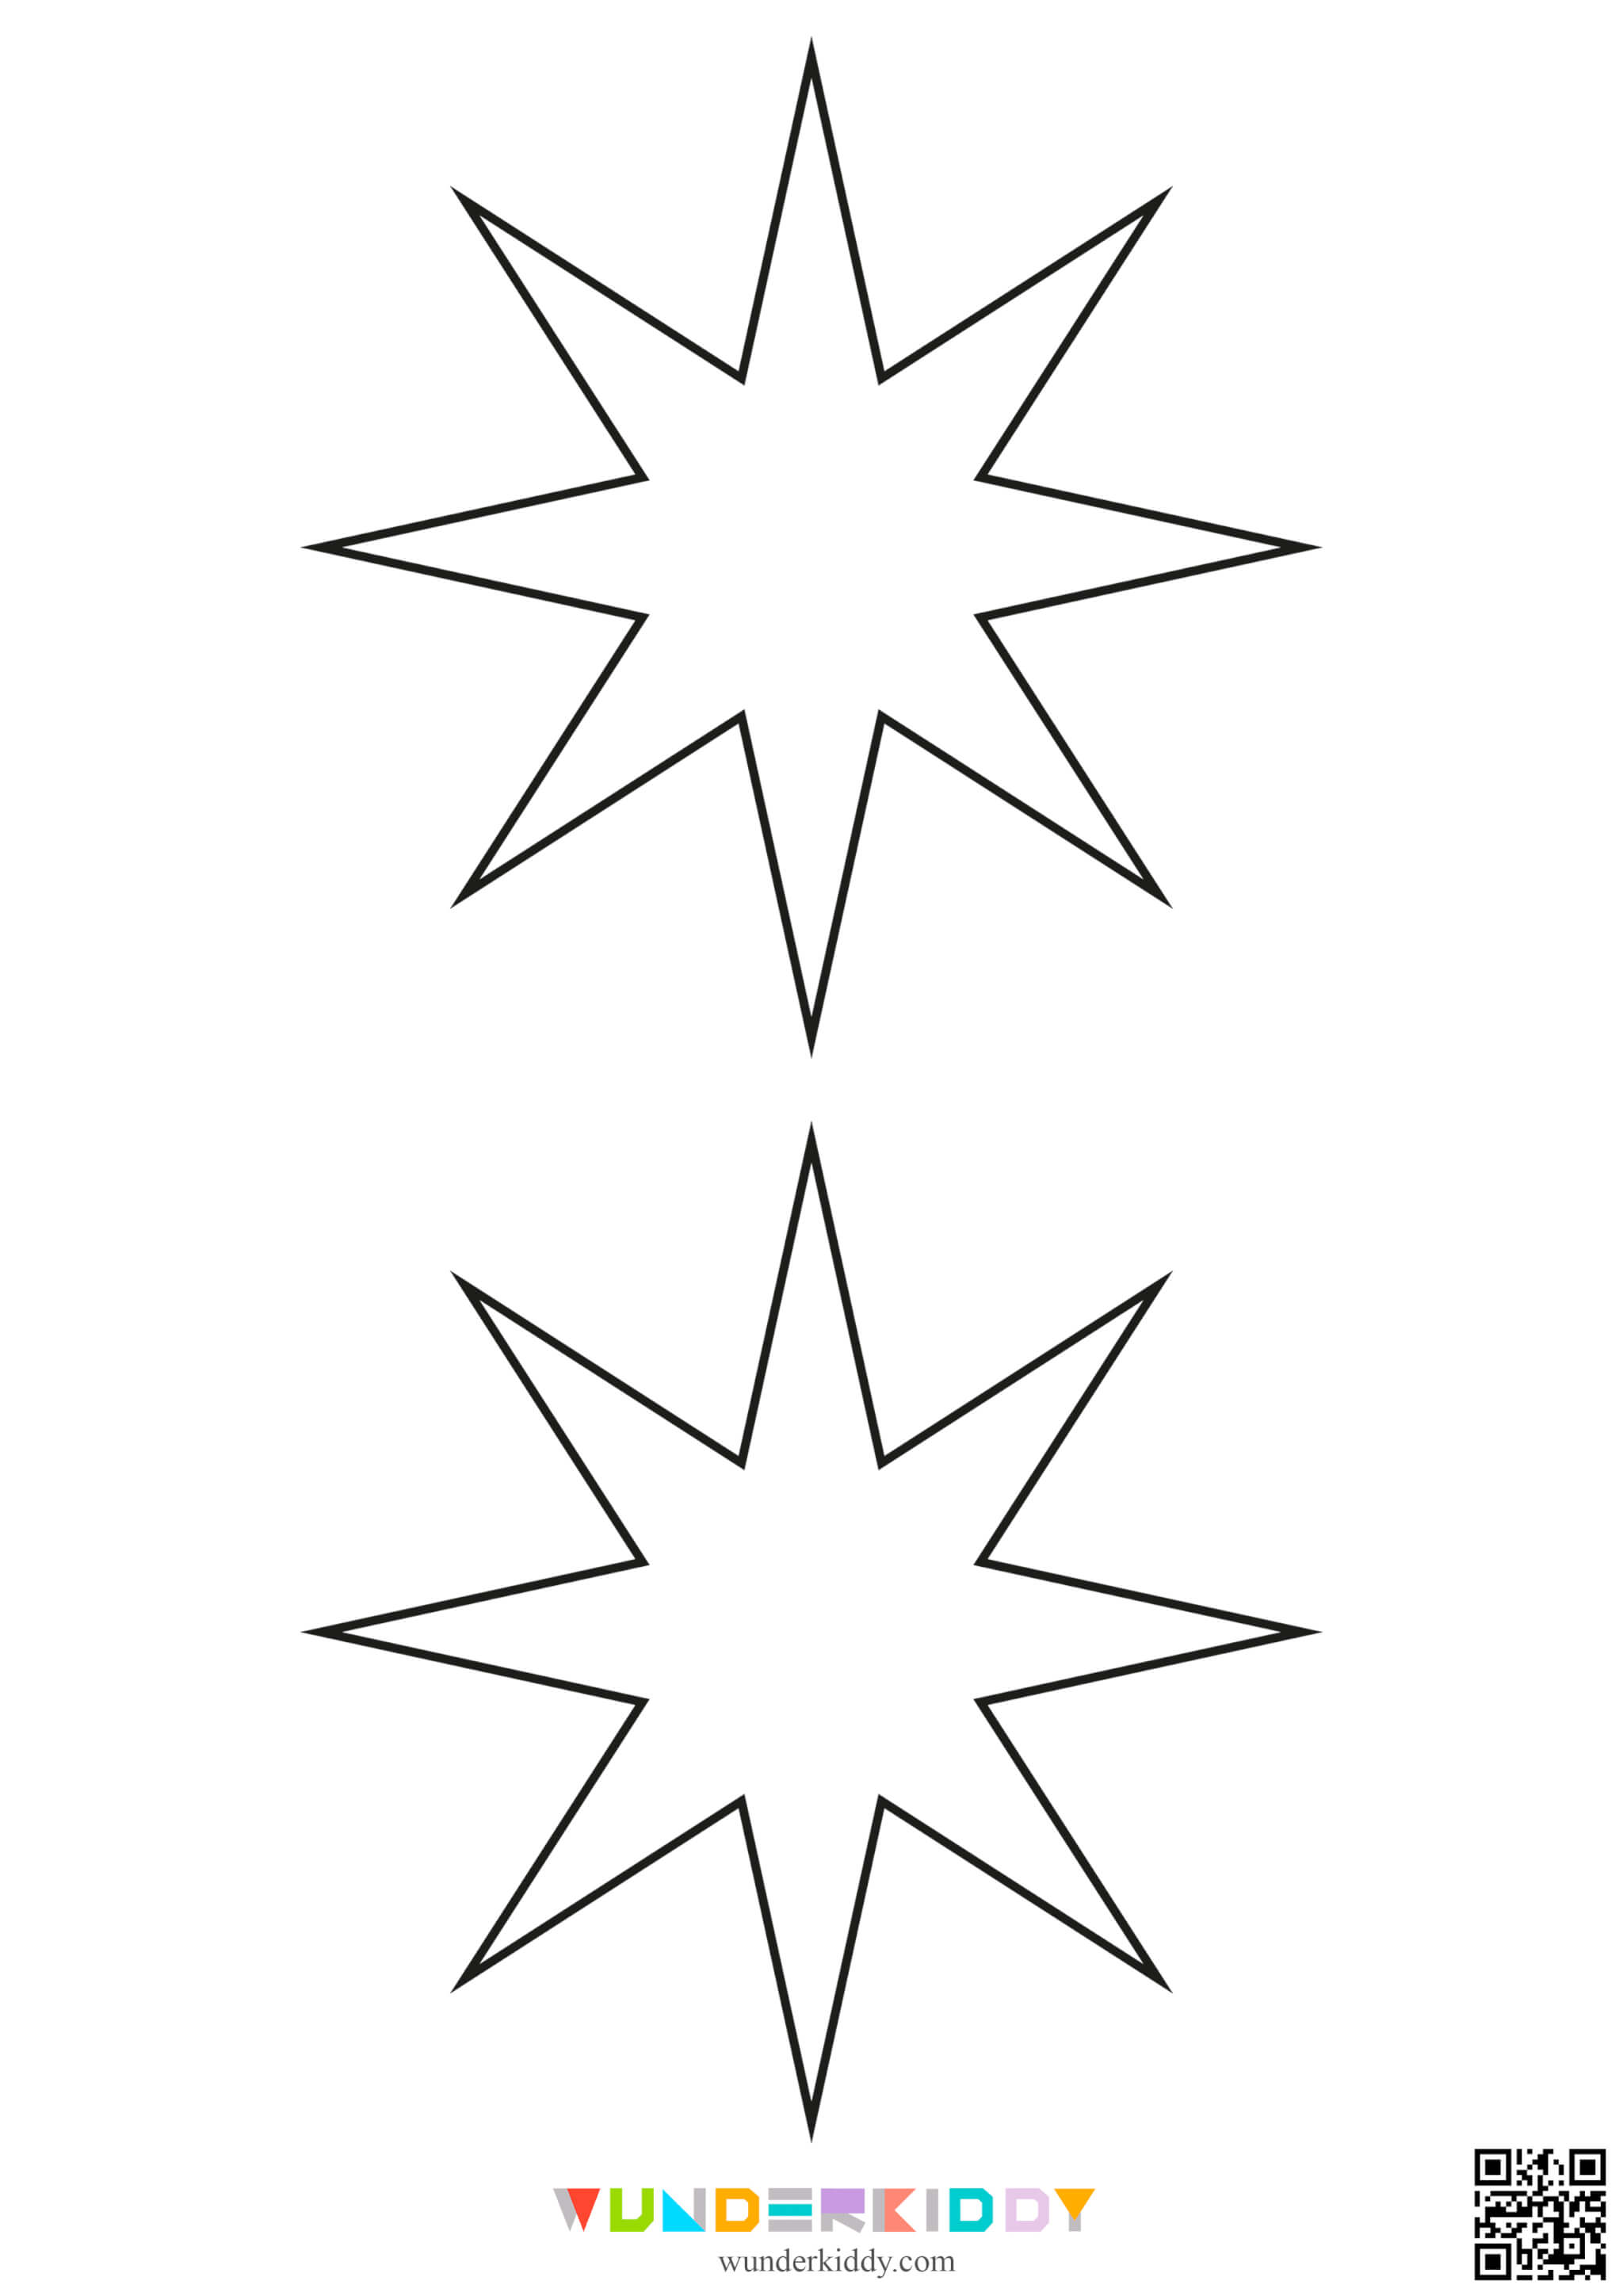 Star Outlines Templates - Image 13